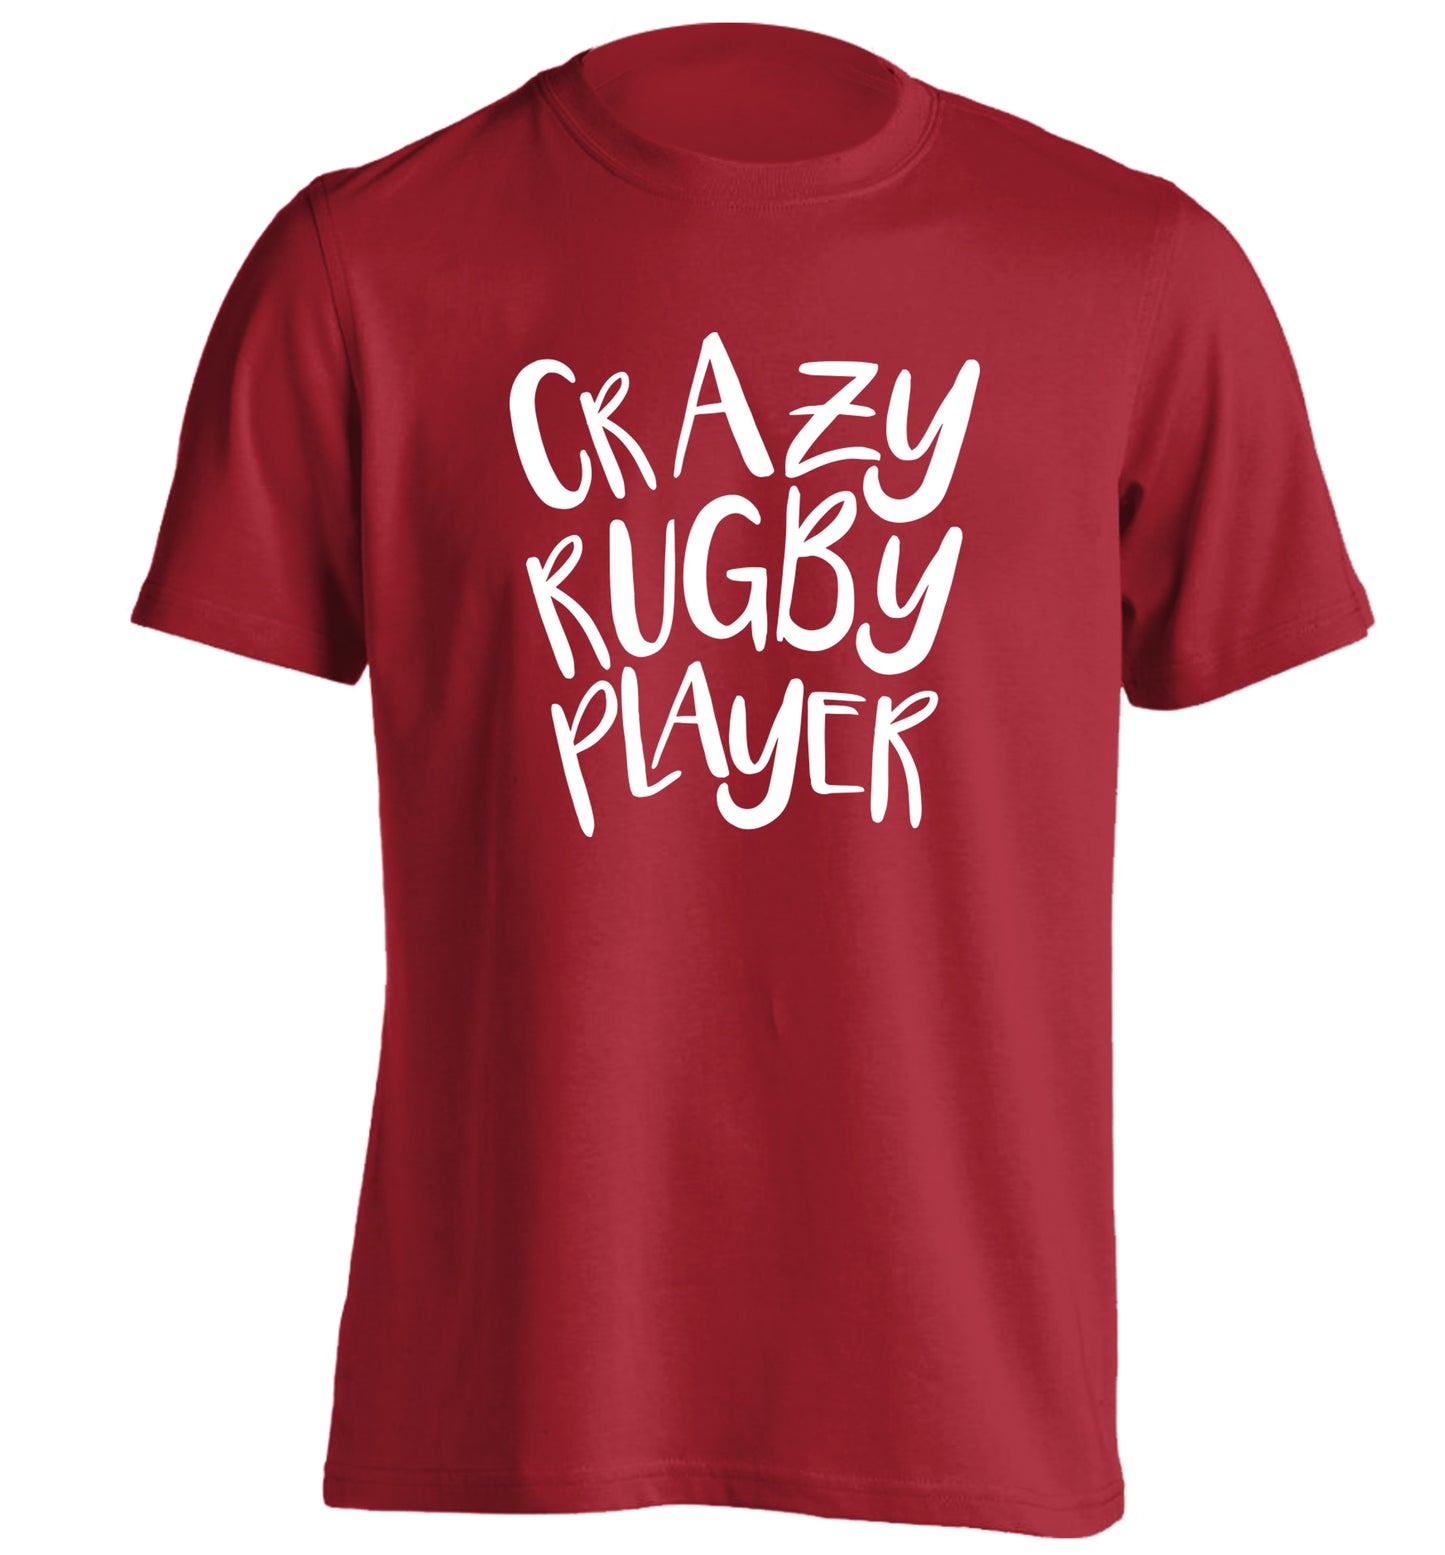 Crazy rugby player adults unisex red Tshirt 2XL